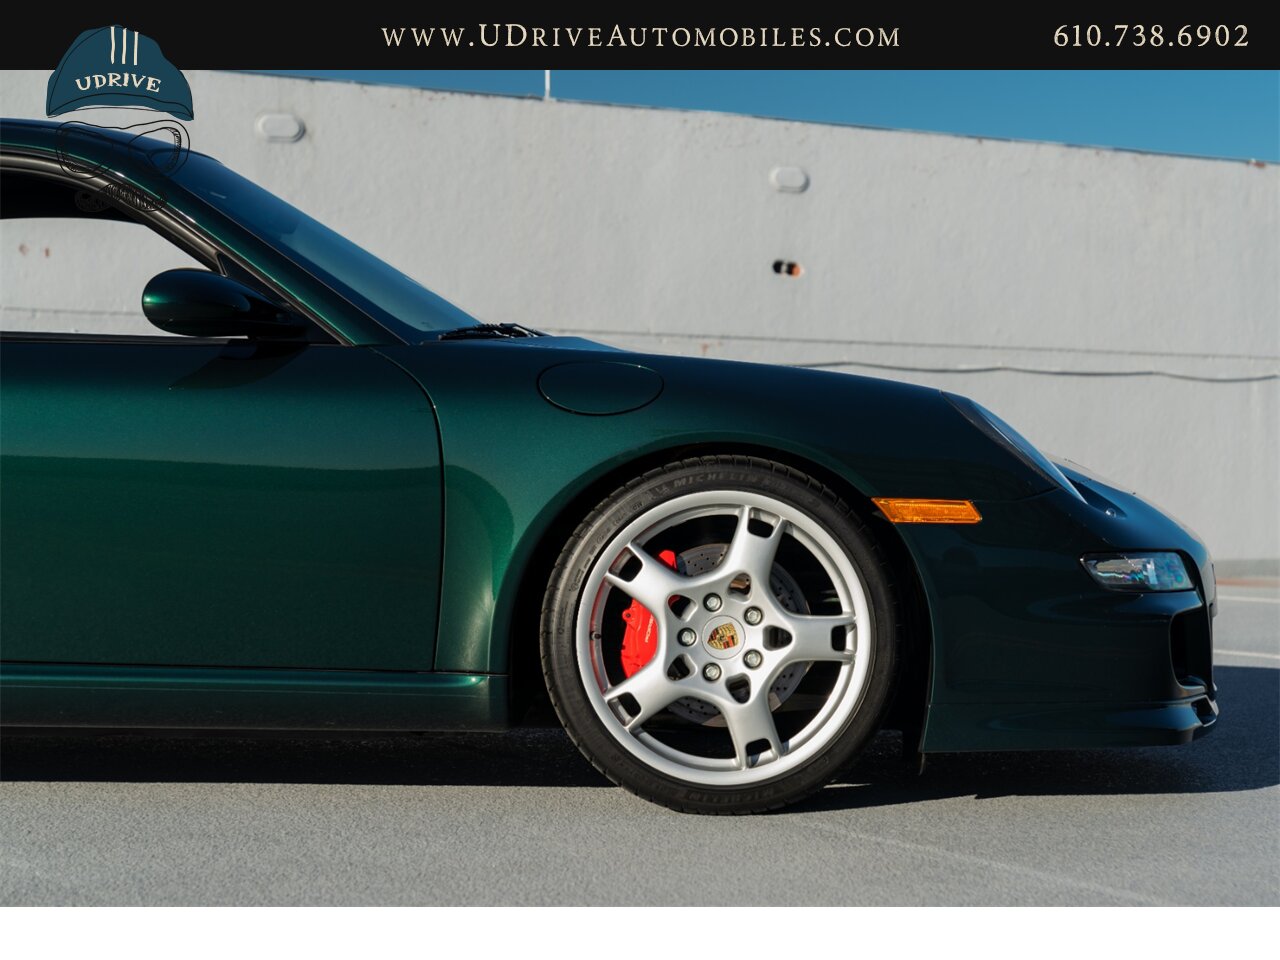 2007 Porsche 911 Carrera S 6Spd 997S RARE X51 Power Kit 381hp  1 of a Kind Forest Green over Blk/Terracotta Chrono Adap Sport Sts $113k MSRP - Photo 15 - West Chester, PA 19382